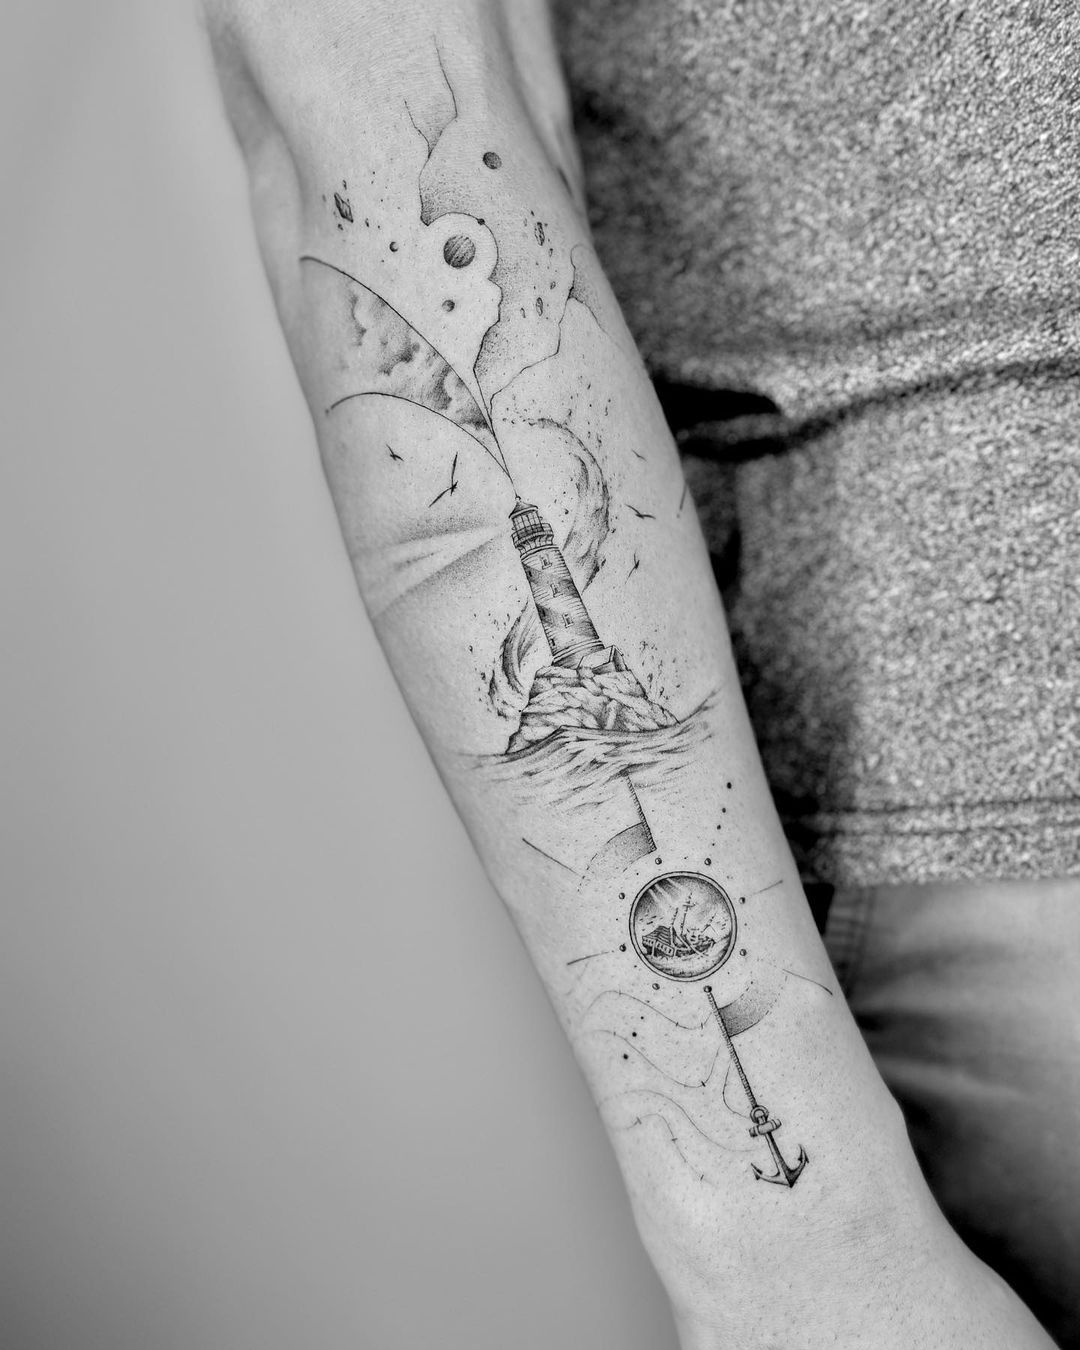 50 Awesome Space Tattoo Designs To Inspire You! | – Daily Hind News